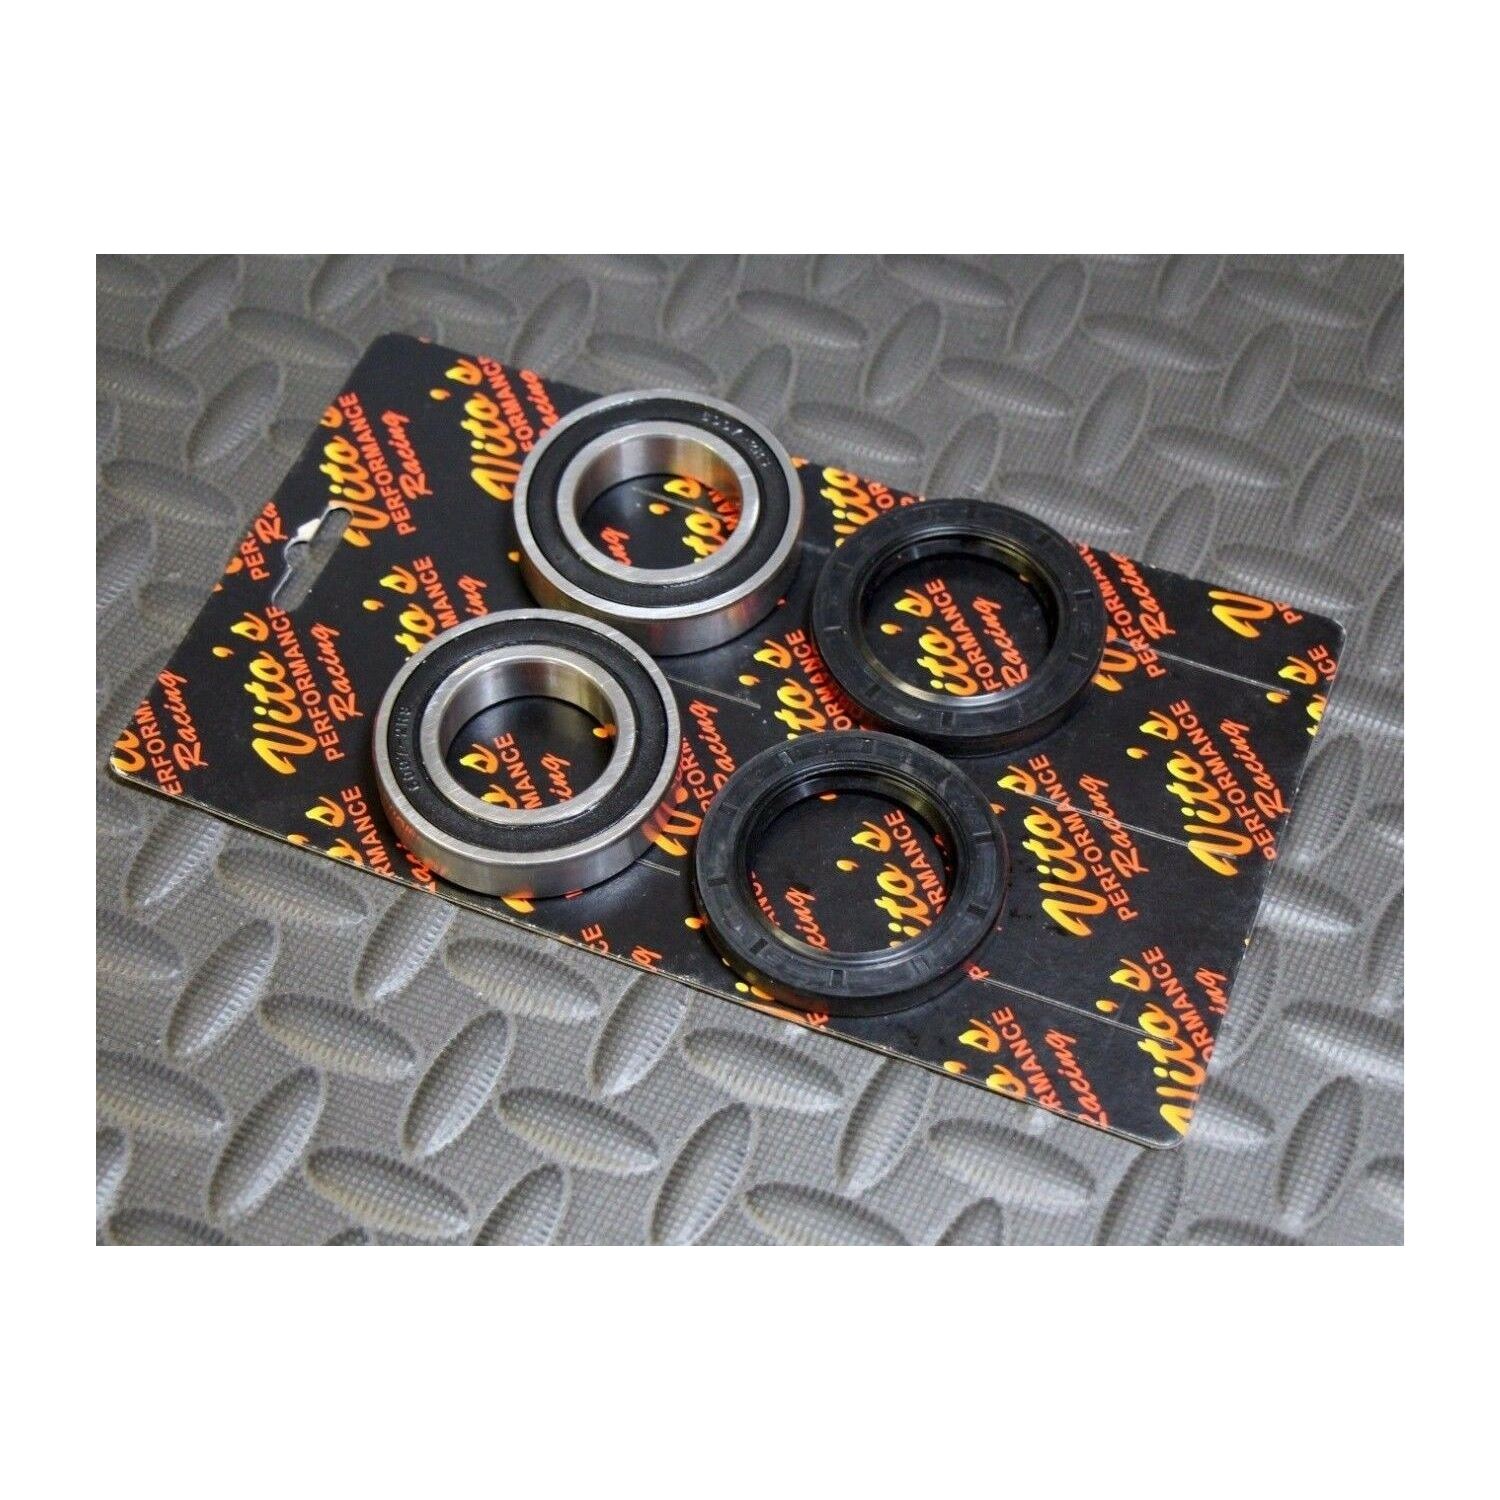 Vito's wheel bearings + seals for axle carrier